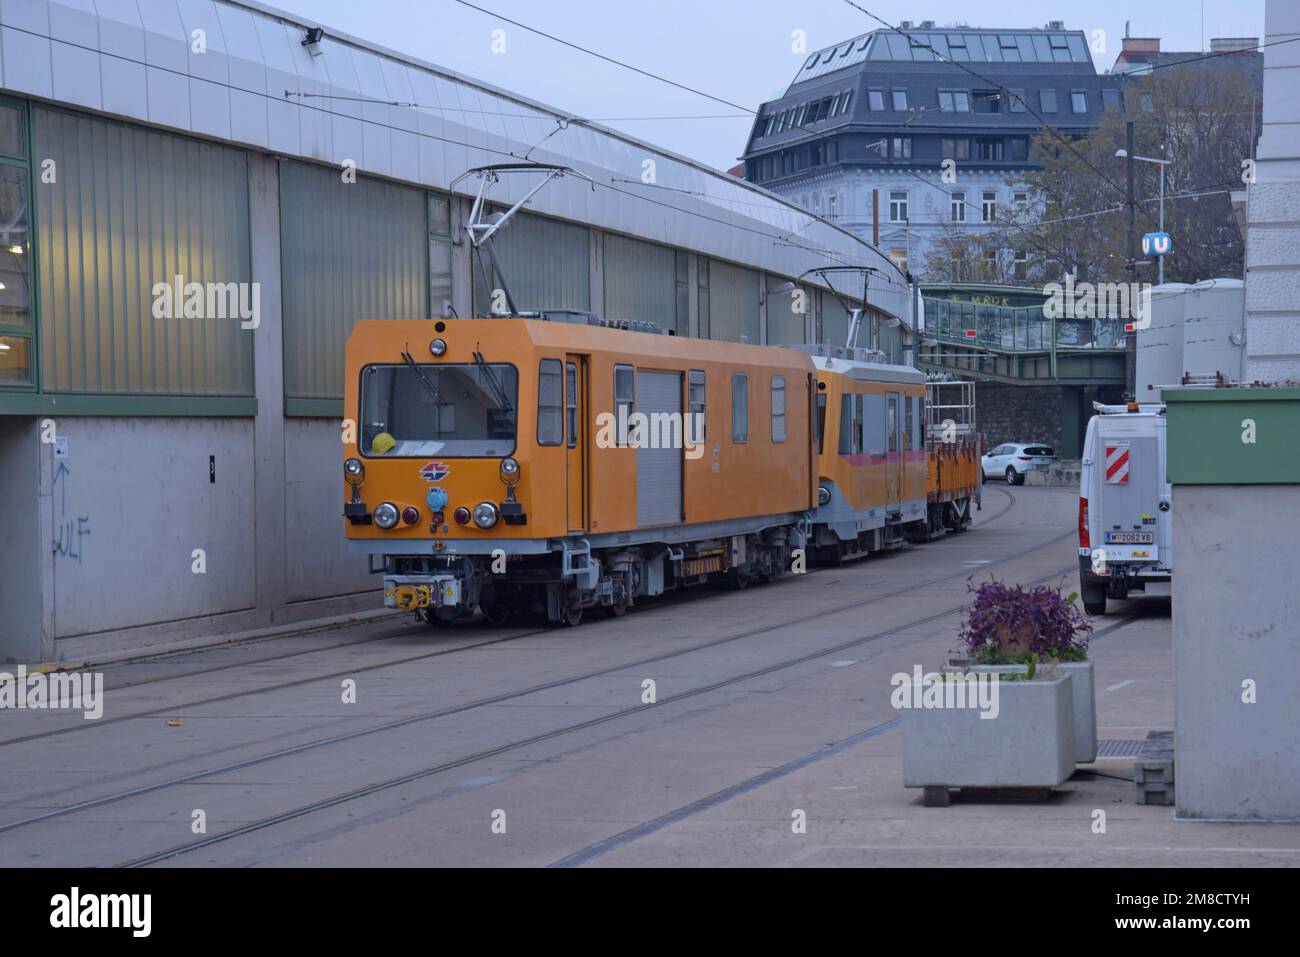 Maintenance and repair vehicles for the Vienna Metro network parked alongside the depot in Betriebsbahnhof Michelbeuern, Vienna, Austria. Dec 202s Stock Photo